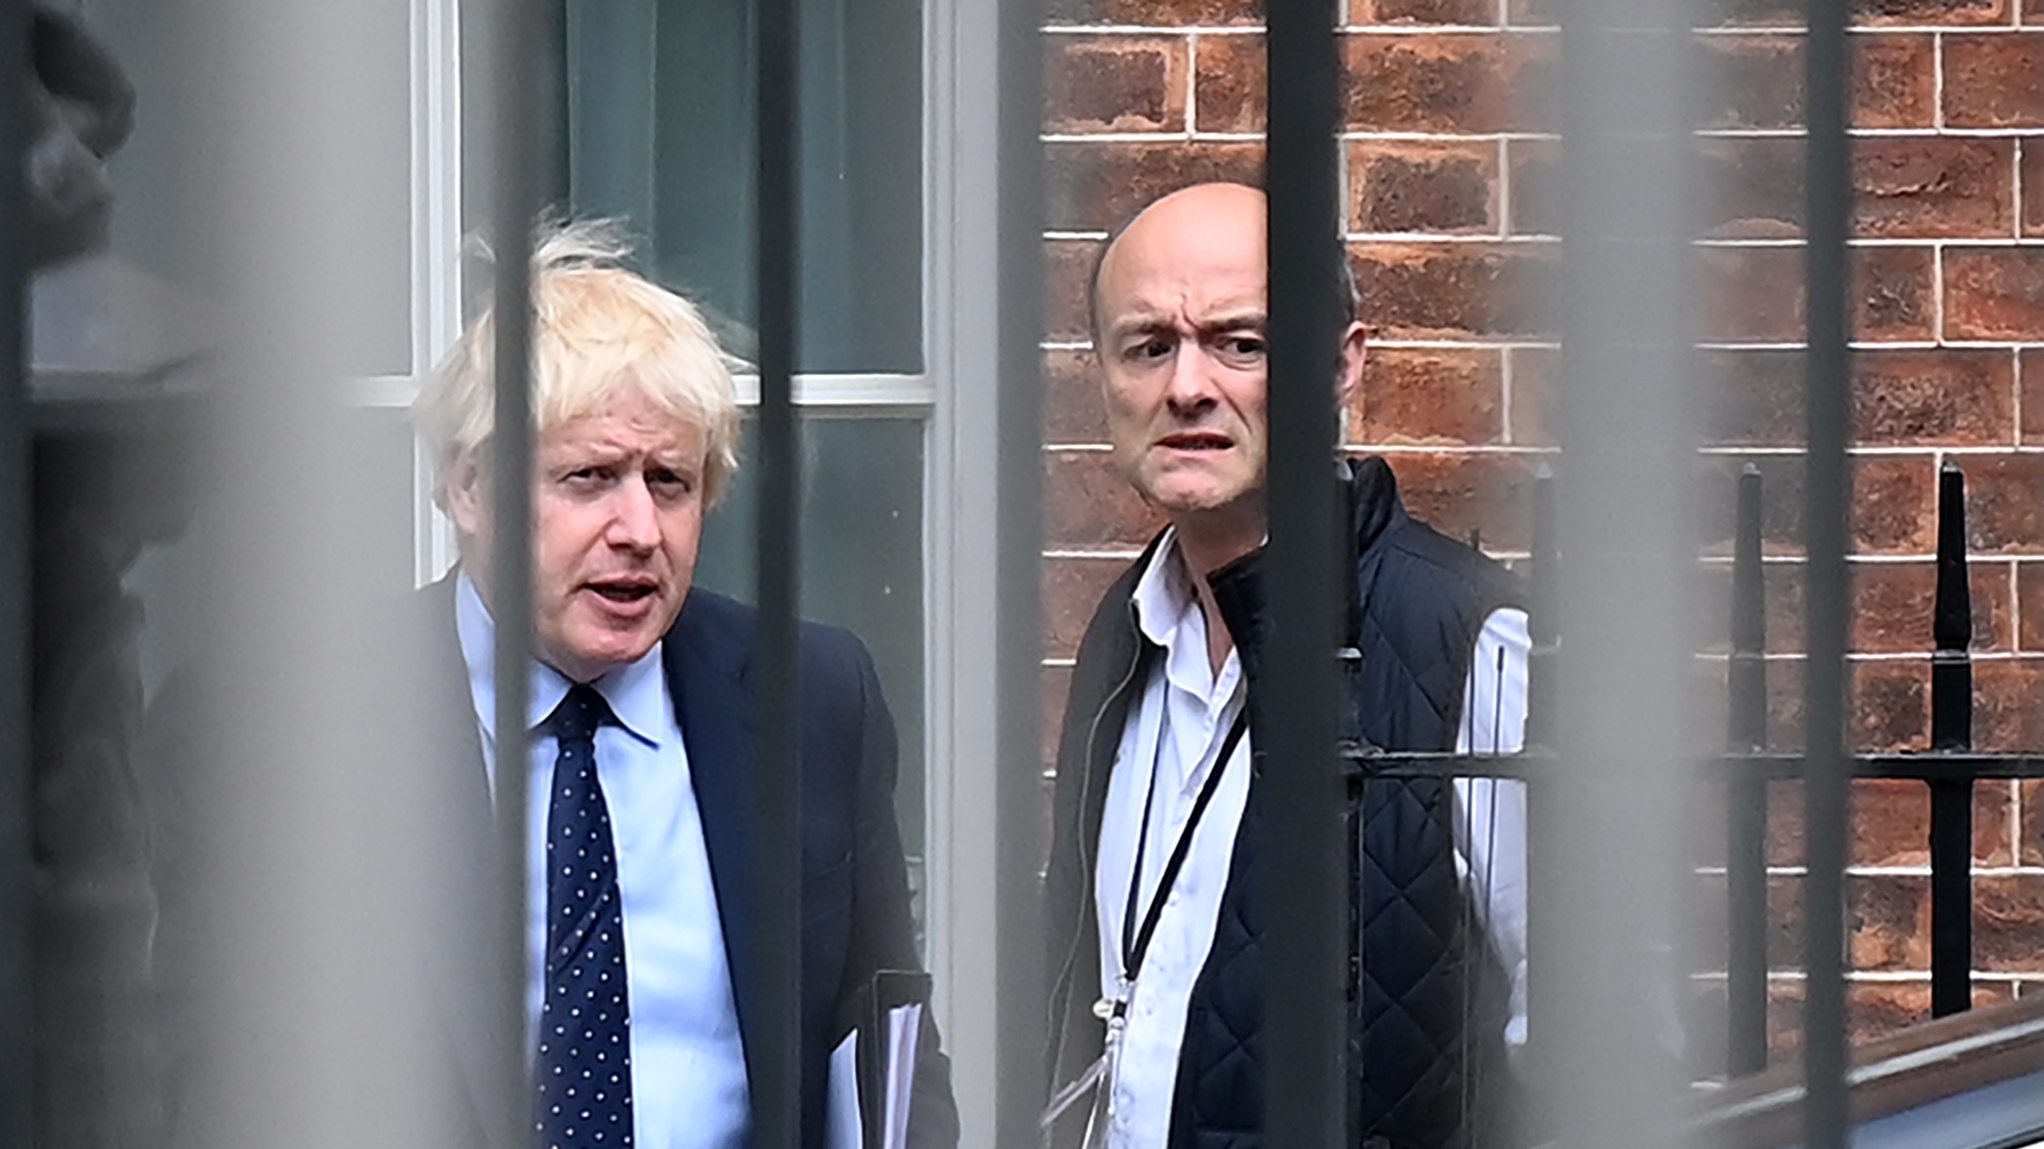 Boris Johnson and his former special advisor Dominic Cummings leave from the rear of Downing Street